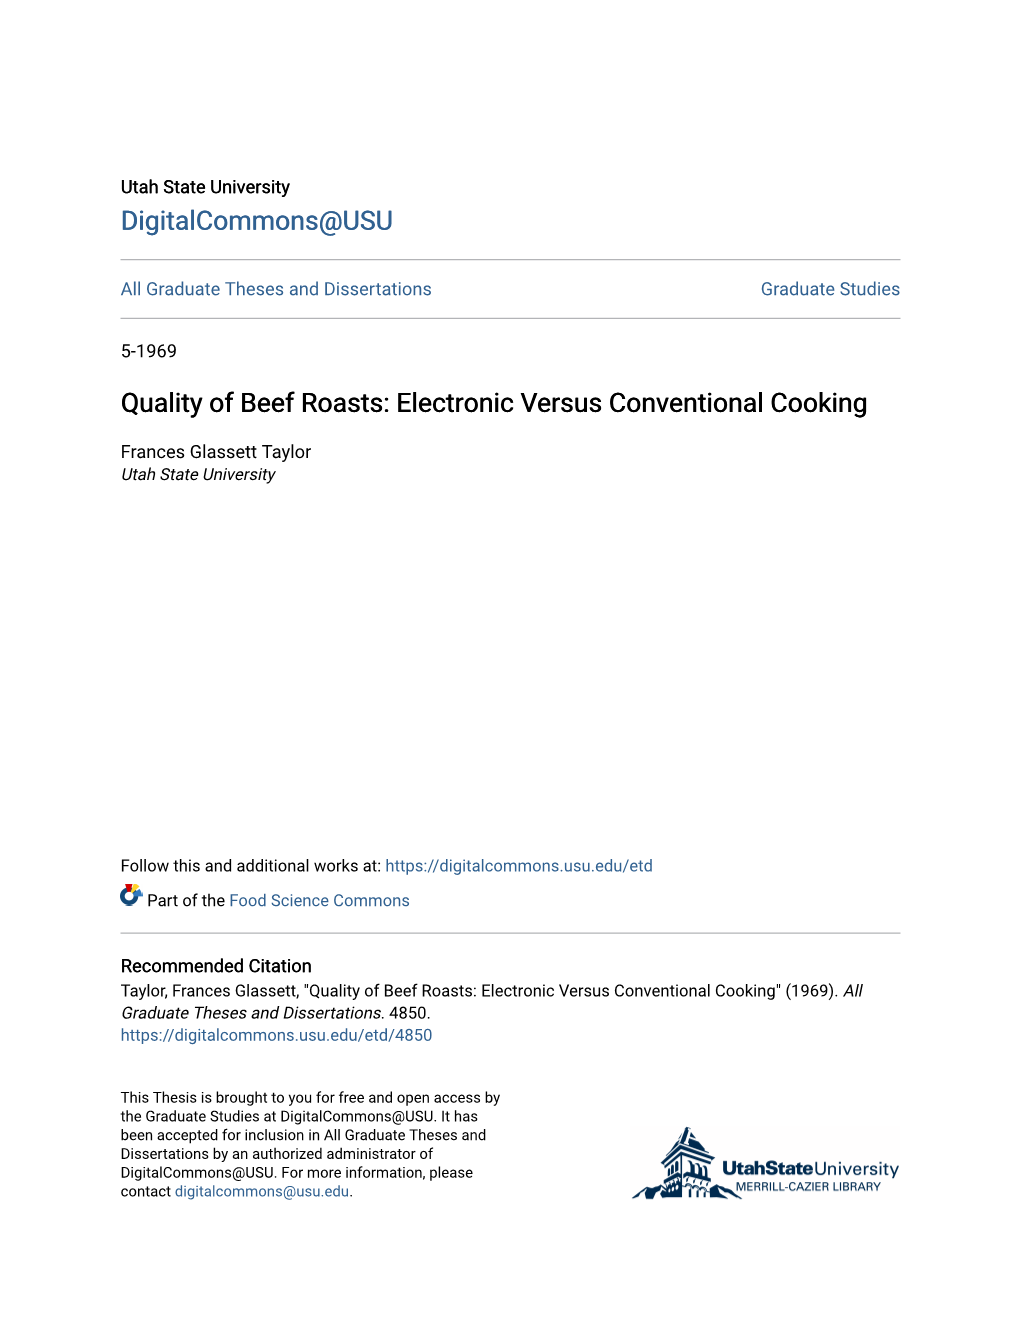 Quality of Beef Roasts: Electronic Versus Conventional Cooking